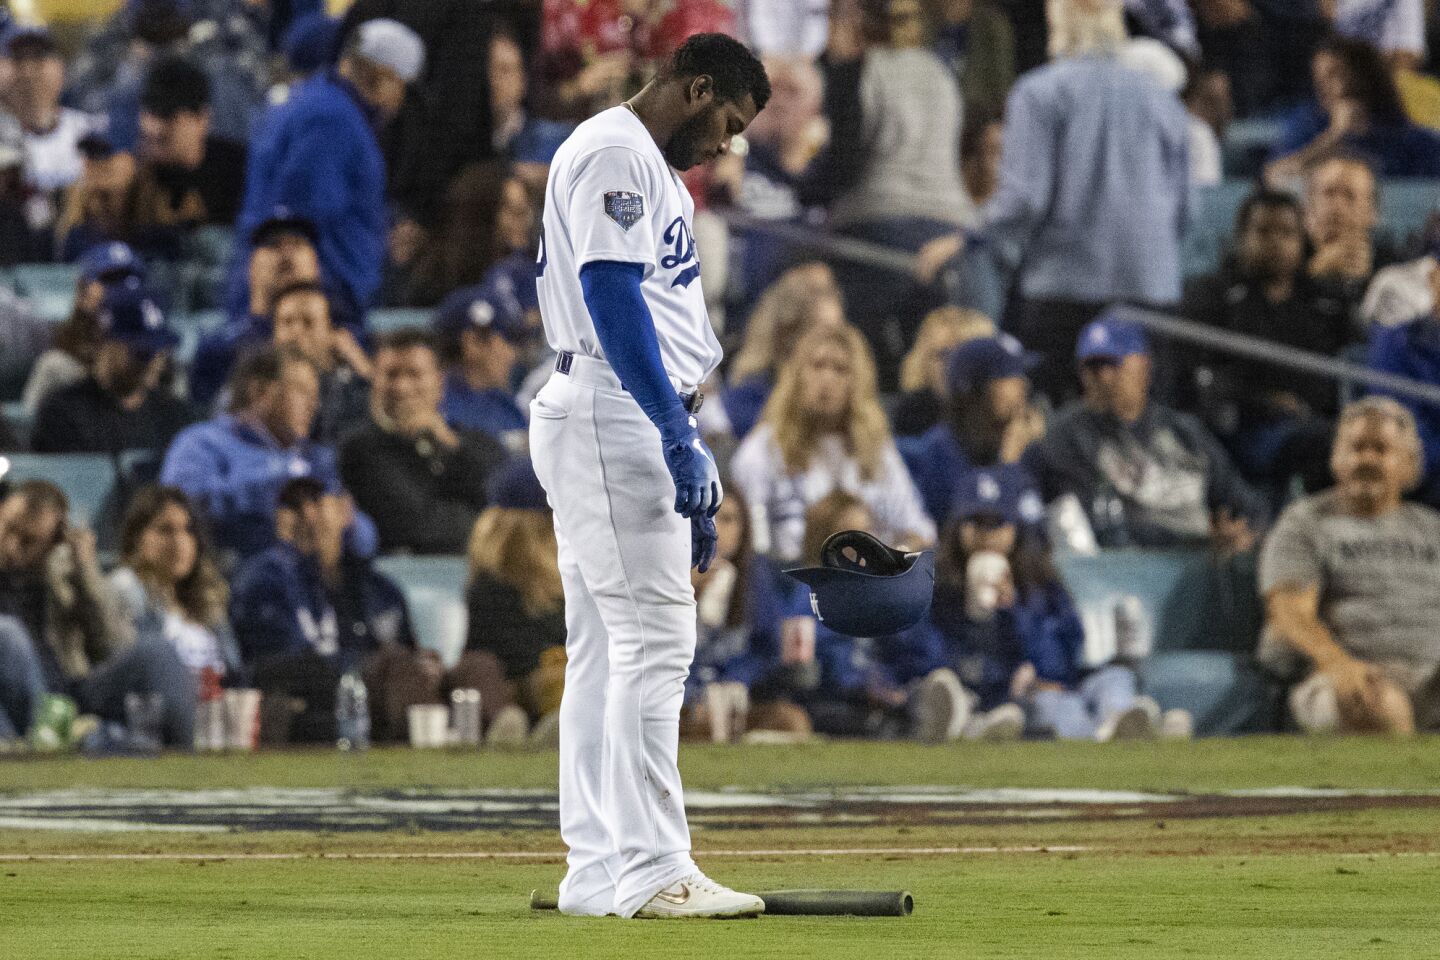 Dodgers right fielder Yasiel Puig drops his bat and helmet in the infield after flying out to end the fourth inning.